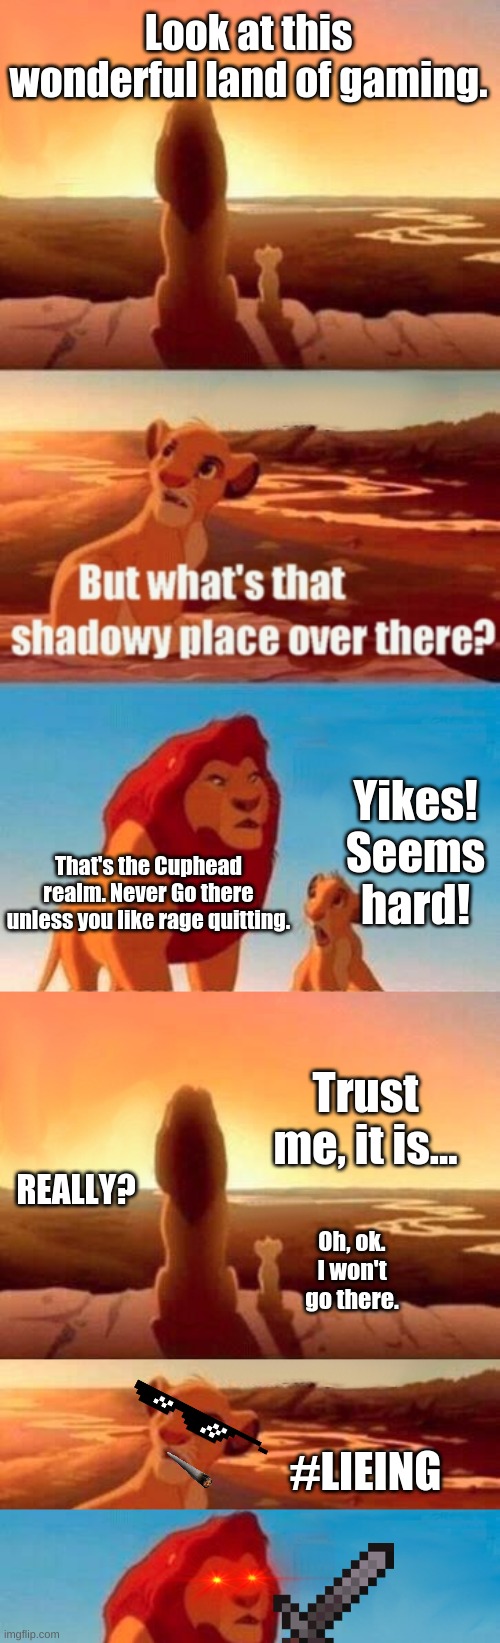 Never play Cuphead. It's hard... | Look at this wonderful land of gaming. Yikes! Seems hard! That's the Cuphead realm. Never Go there unless you like rage quitting. Trust me, it is... REALLY? Oh, ok. I won't go there. #LIEING | image tagged in memes,simba shadowy place,cuphead,gaming | made w/ Imgflip meme maker